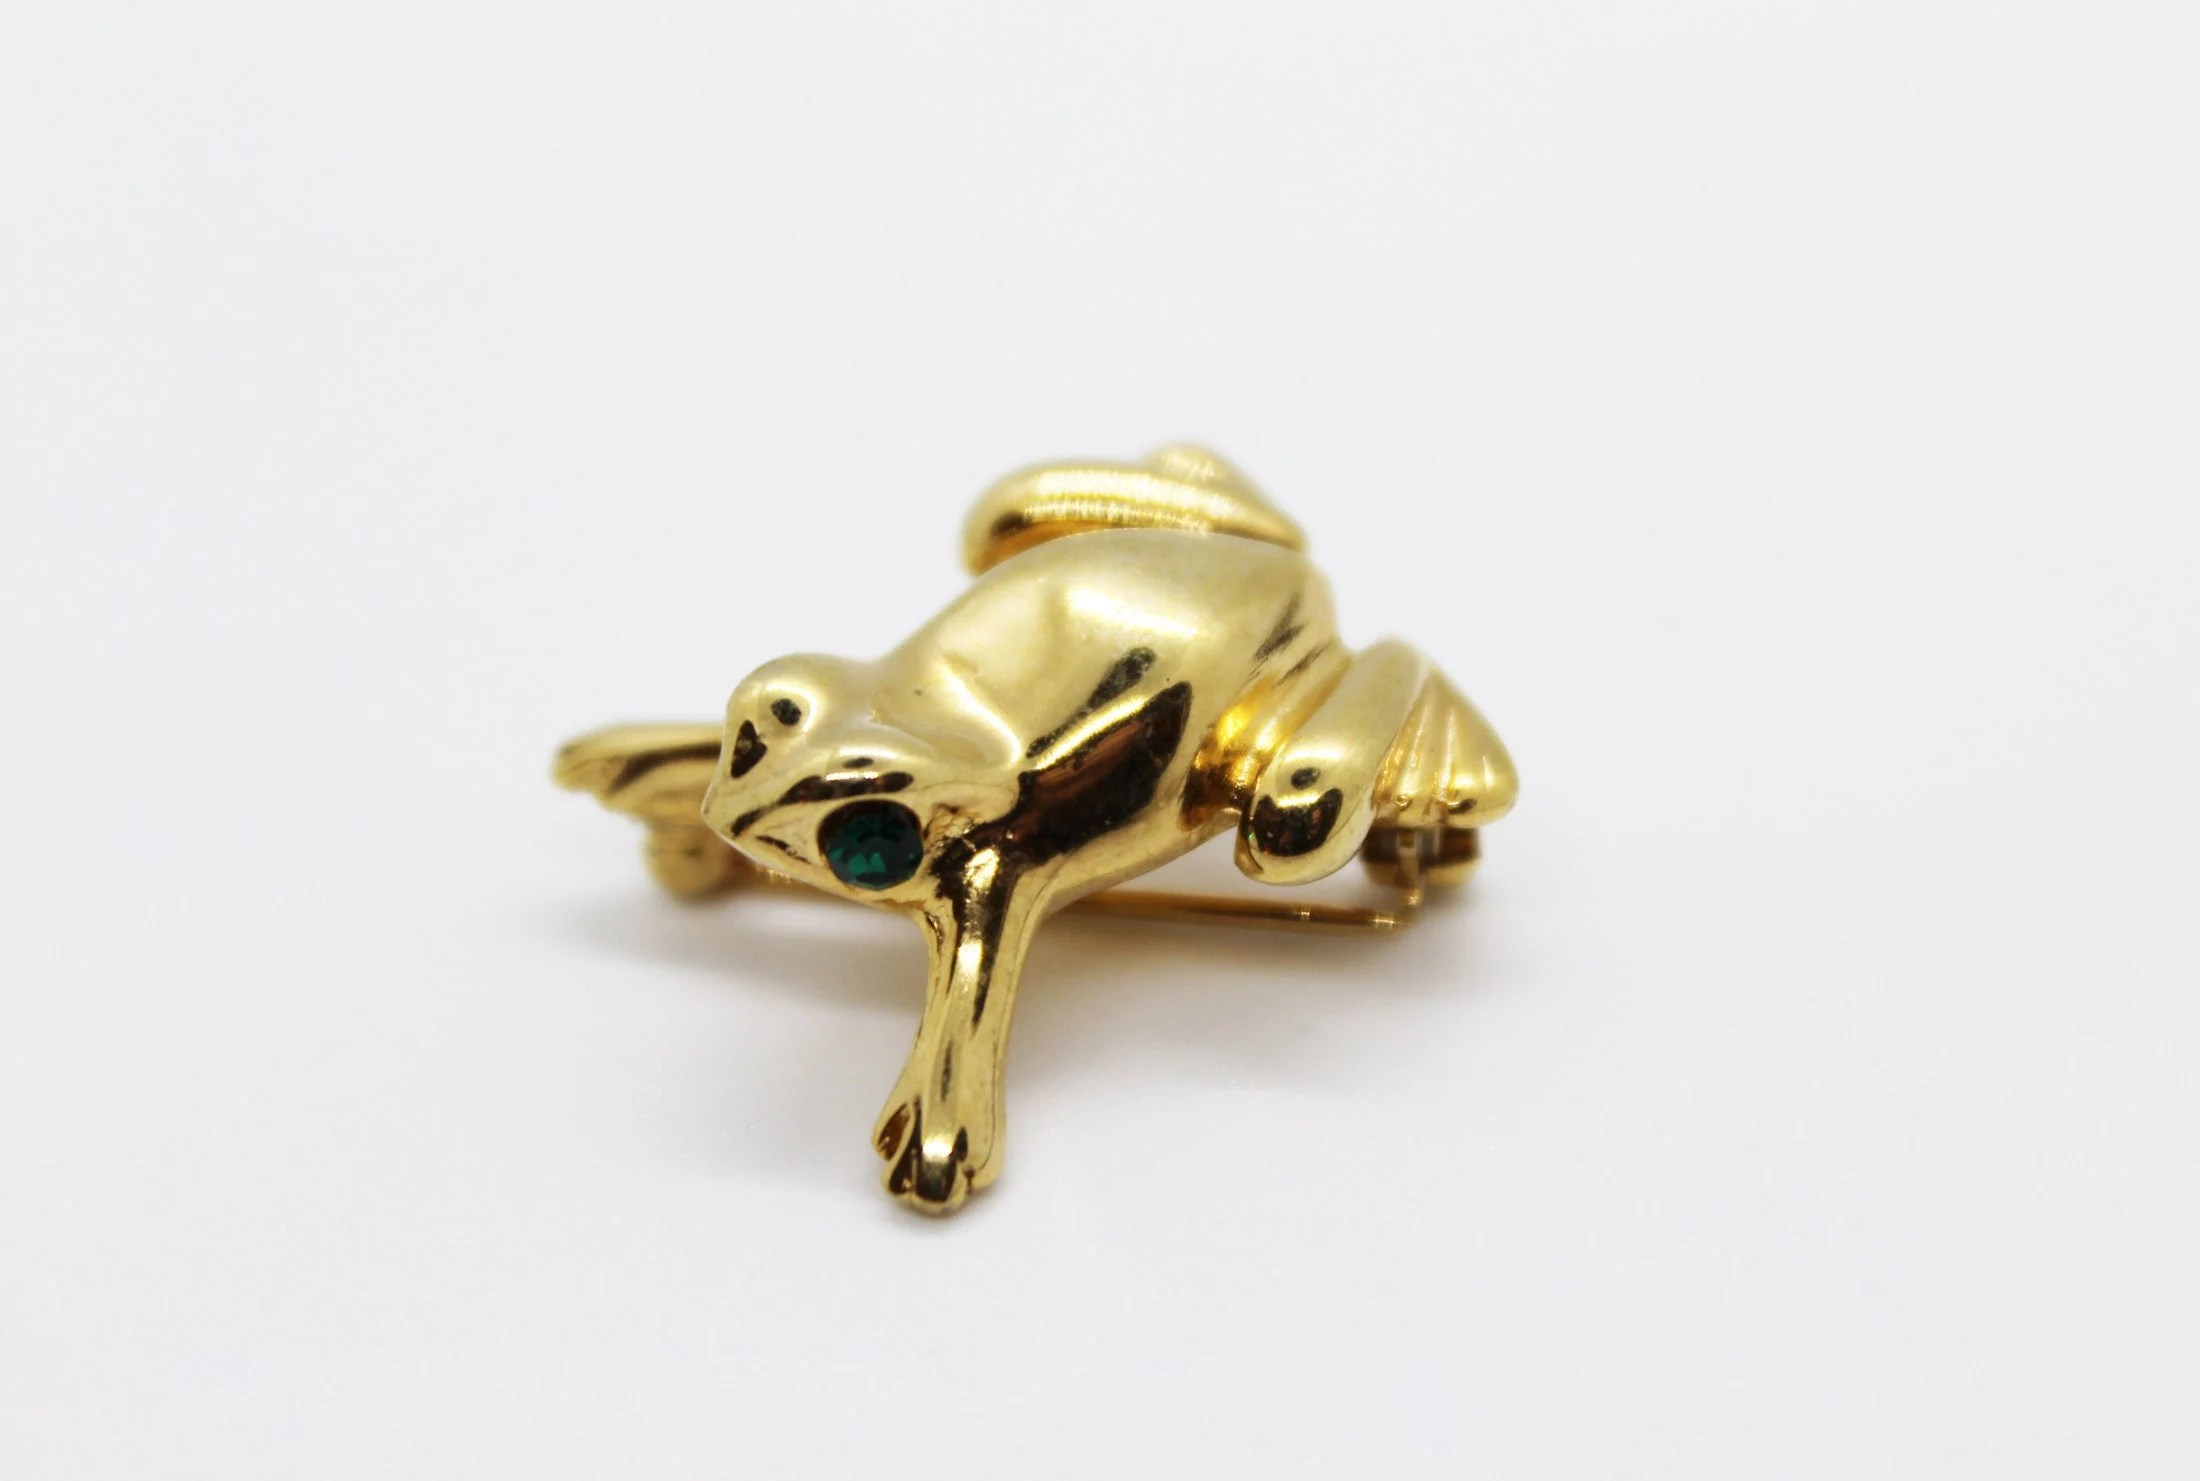 Napier Signed Small Gold Tone Frog Brooch Lapel Pin – Vintage Cottage, Light Academia, Retro, Farm, Animal Lover Jewelry